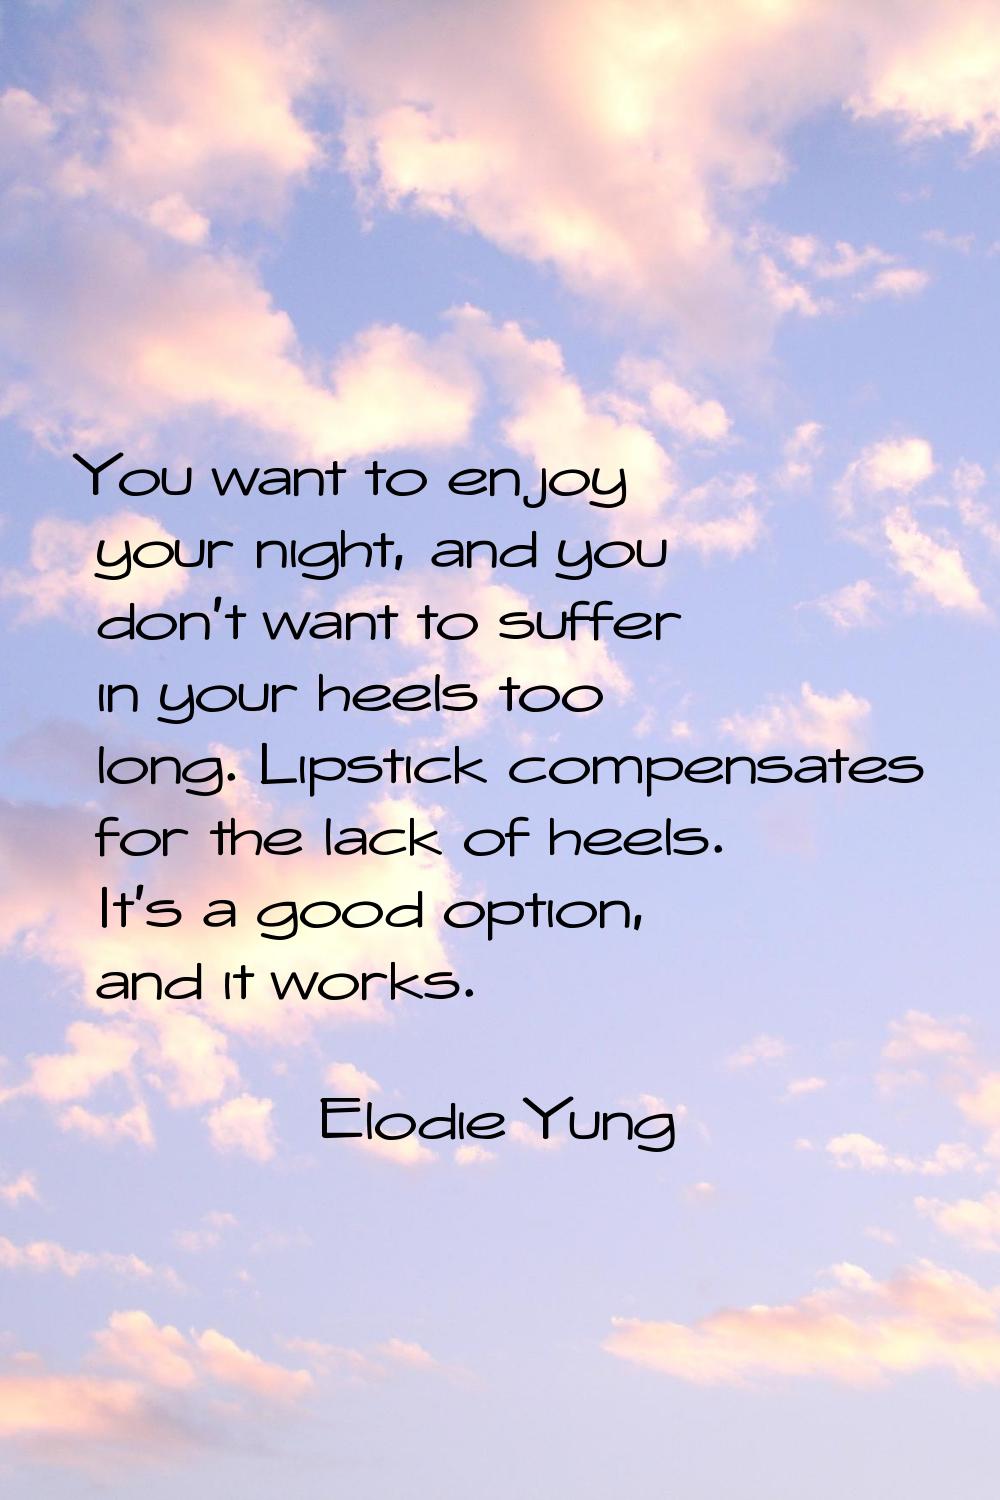 You want to enjoy your night, and you don't want to suffer in your heels too long. Lipstick compens